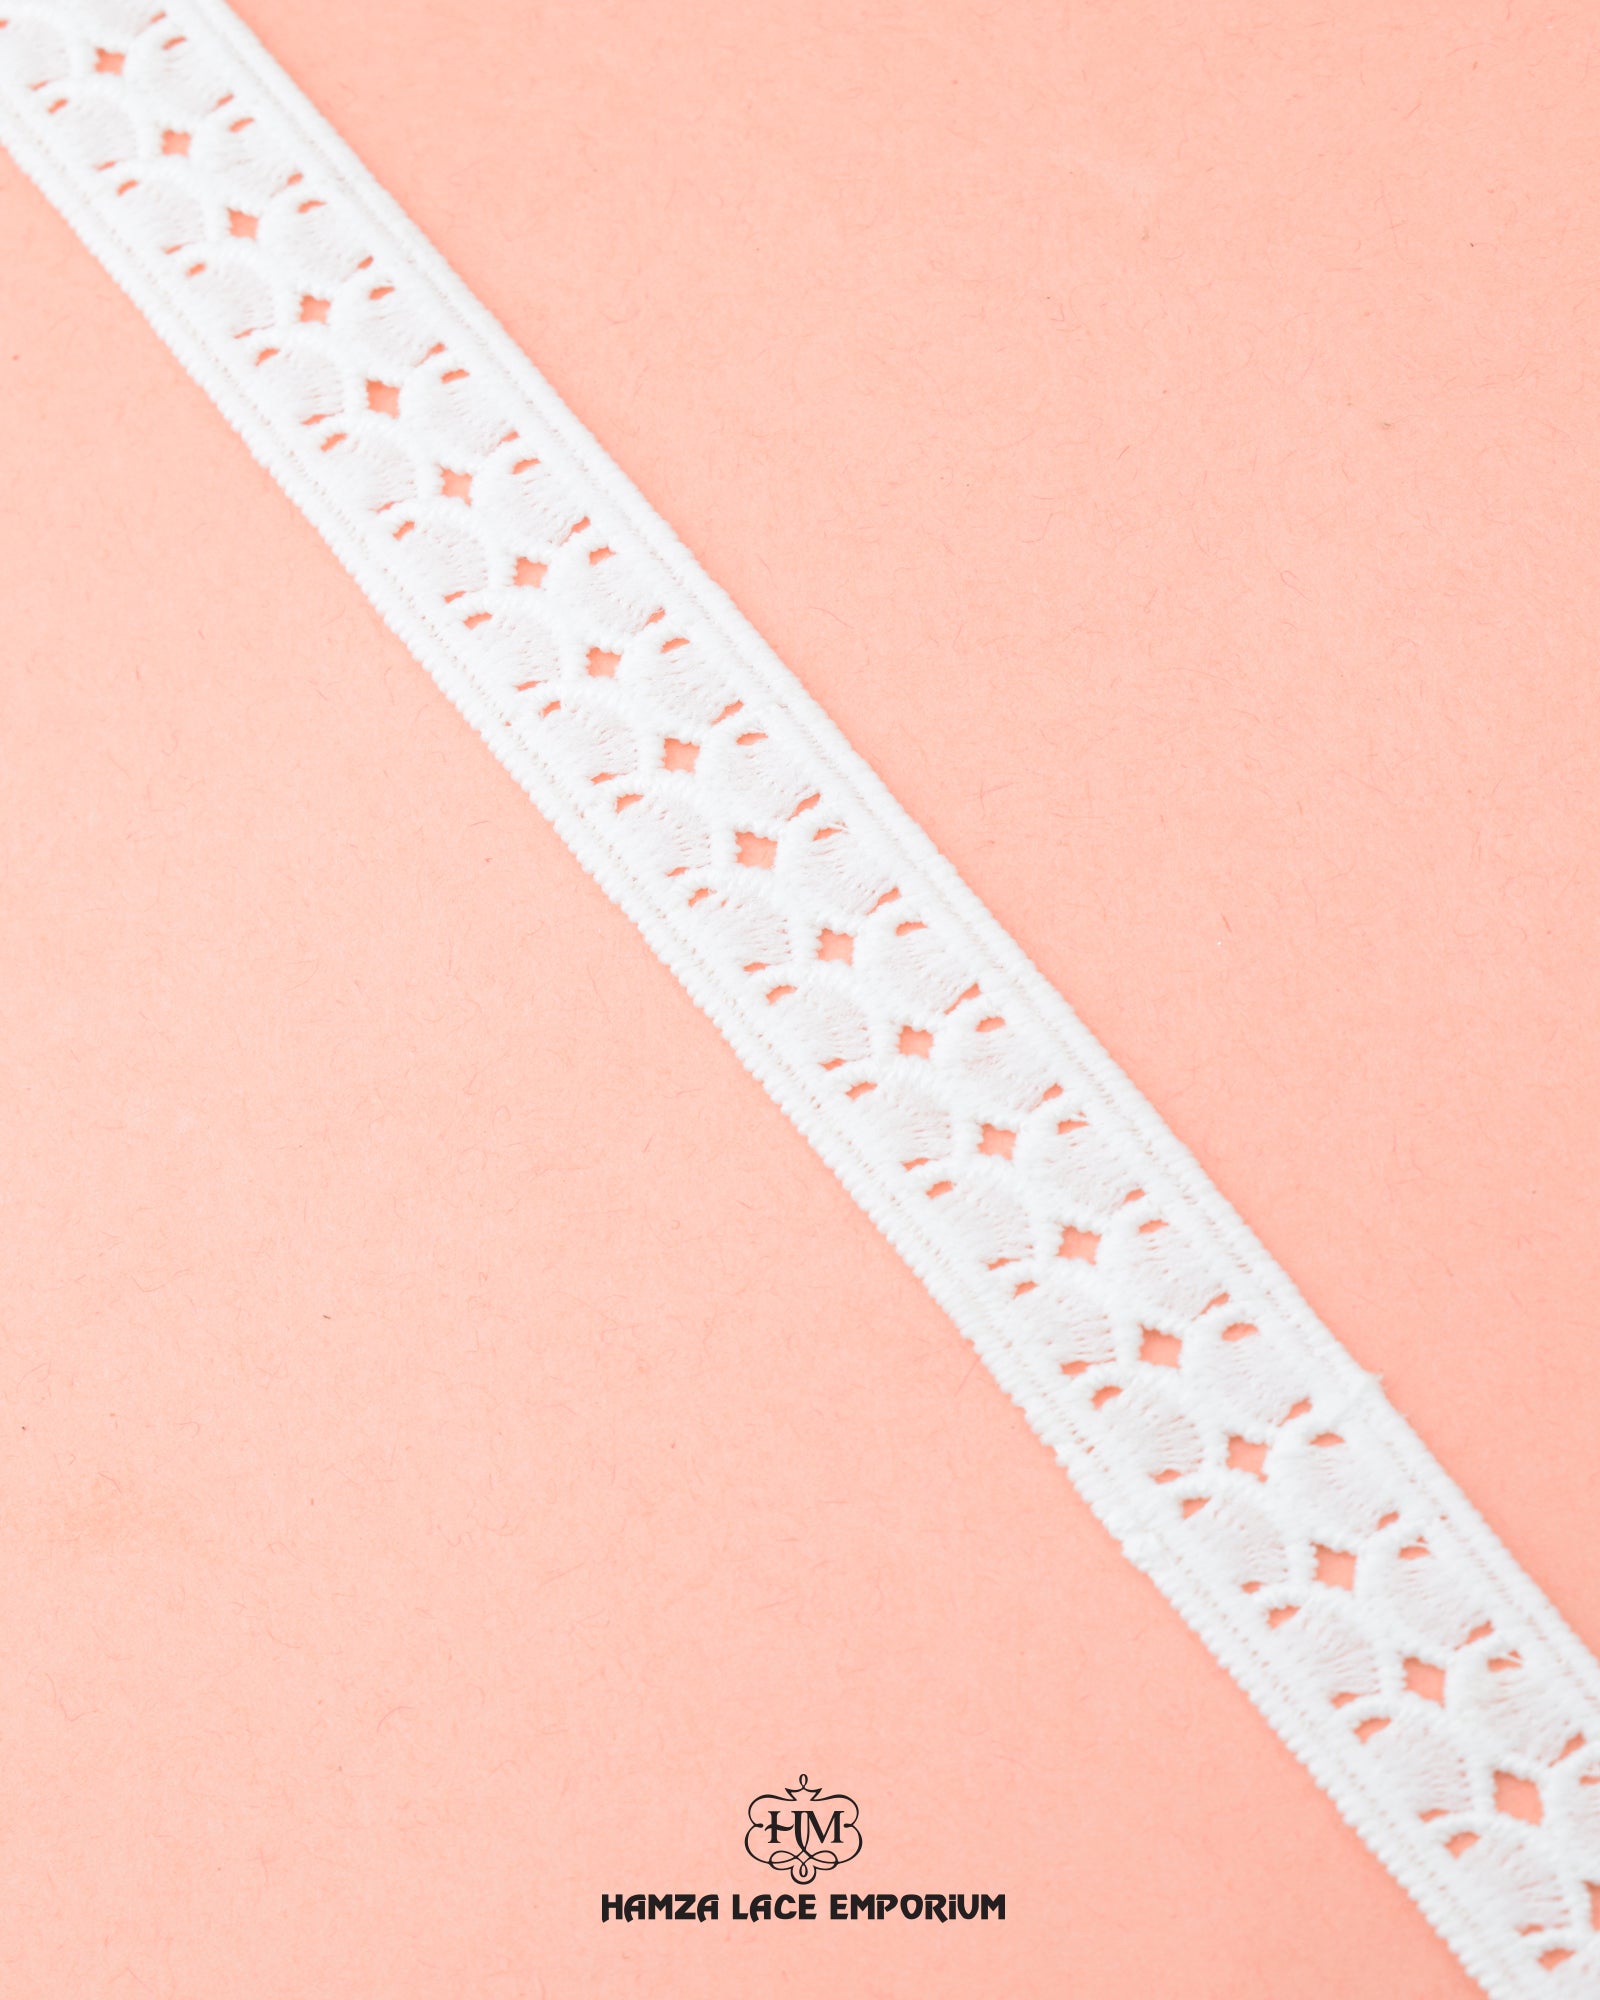 A white 'Two Side Border Lace 23236' with the 'Hamza Lace' sign and logo